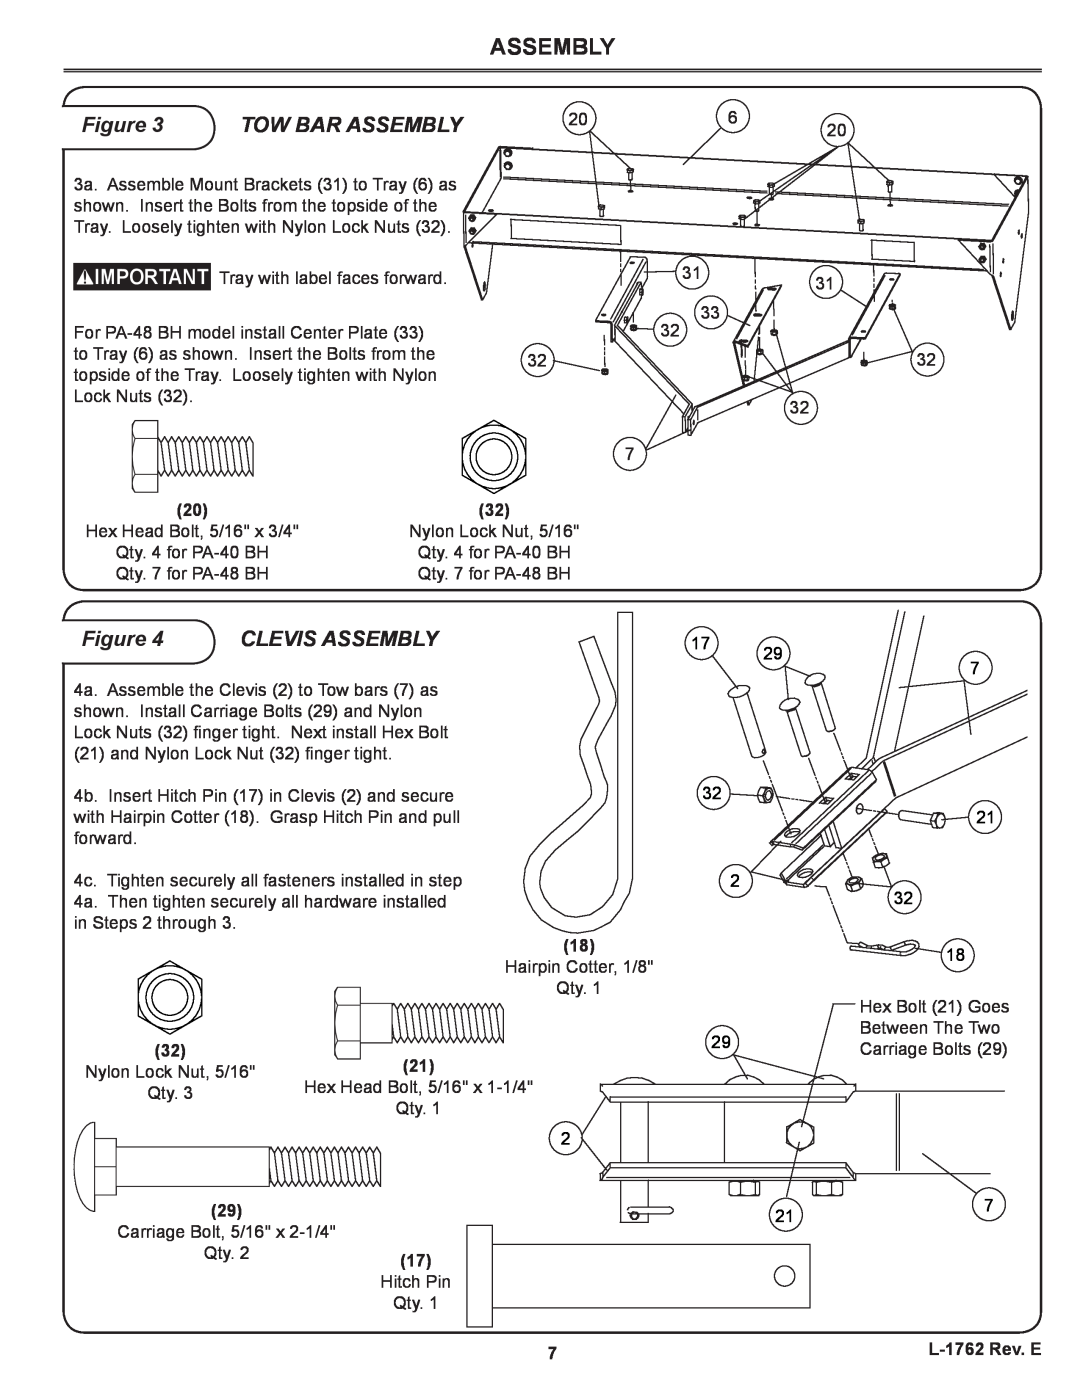 Brinly-Hardy PA-40 BH, PA-48 BH owner manual Clevis Assembly, 17 32 2, 7 21 32 18, Tow Bar Assembly 